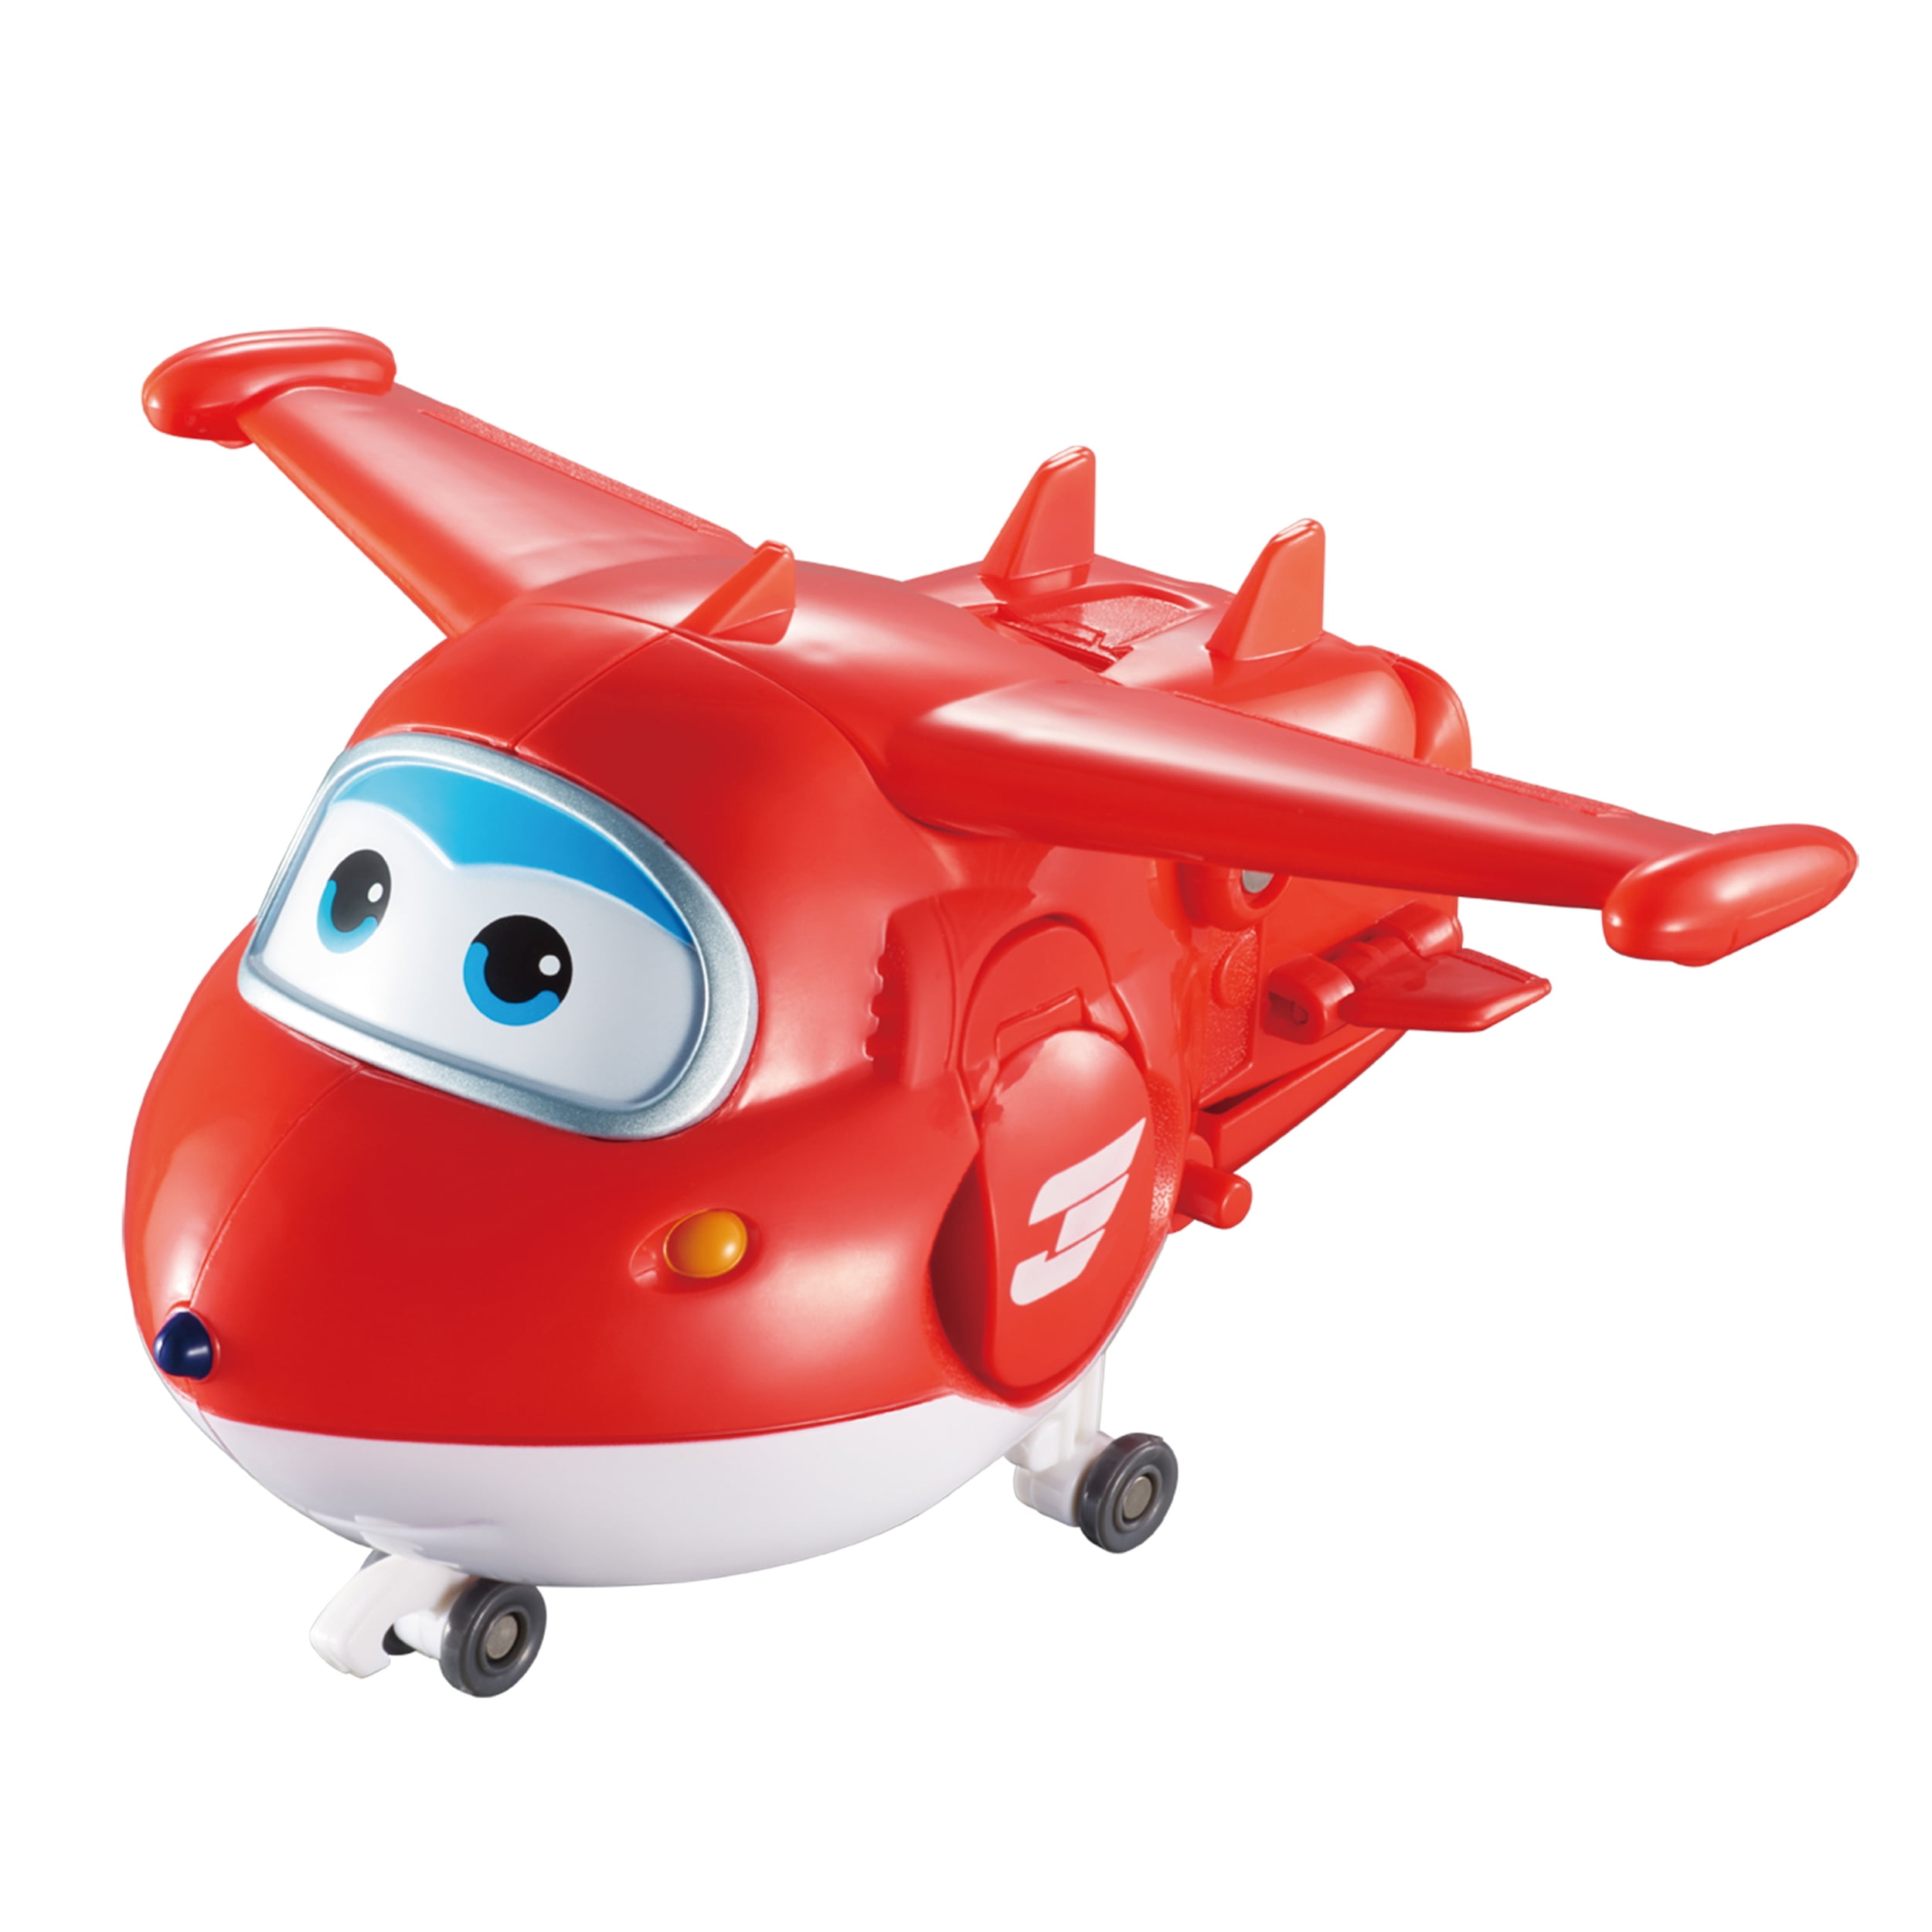 8 Disney Super Wings Moveable Parts Cake Topper Airplane Toy Play Action Figure 